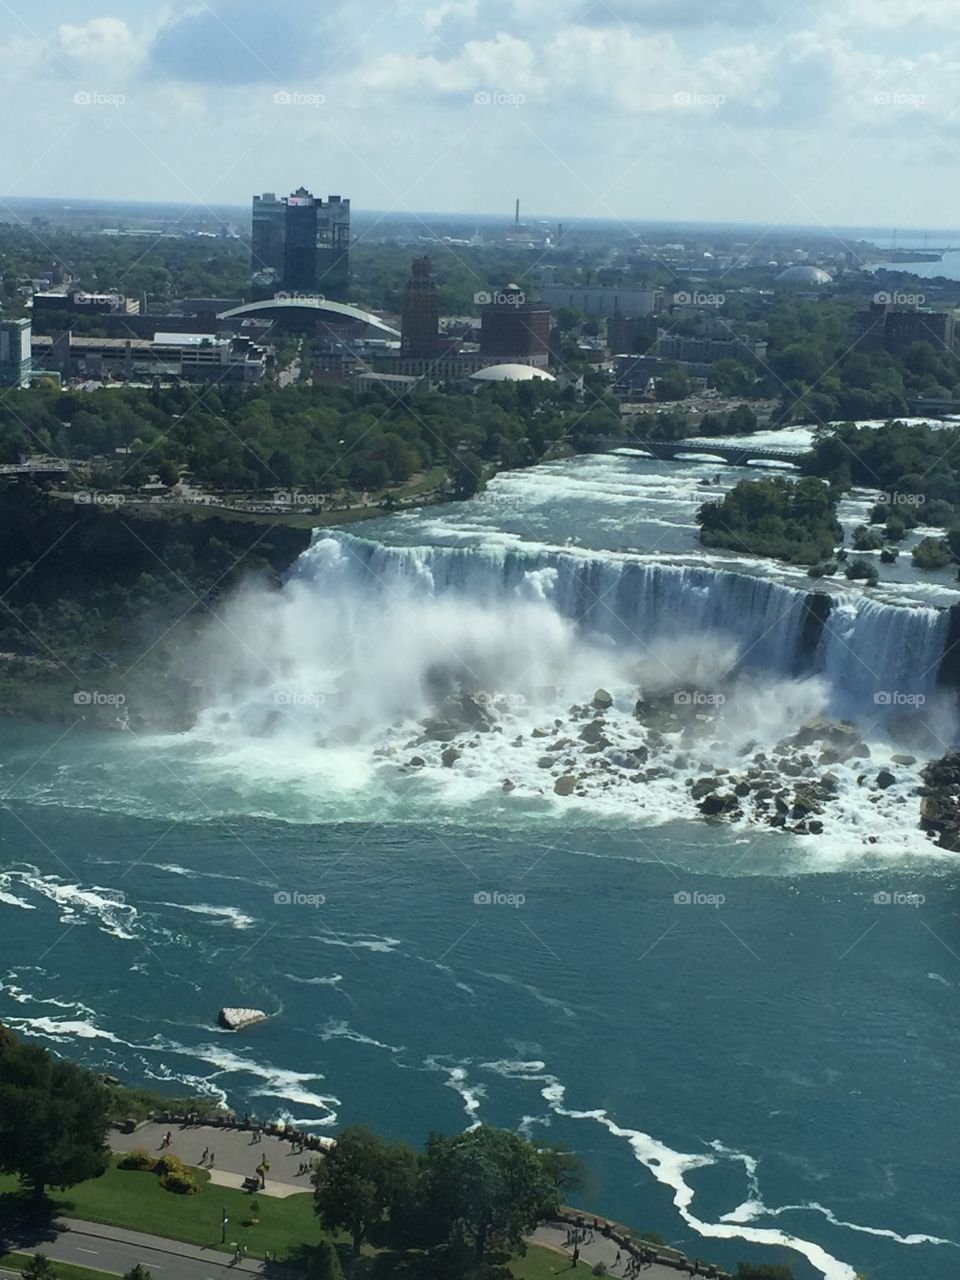 Falls from the tower